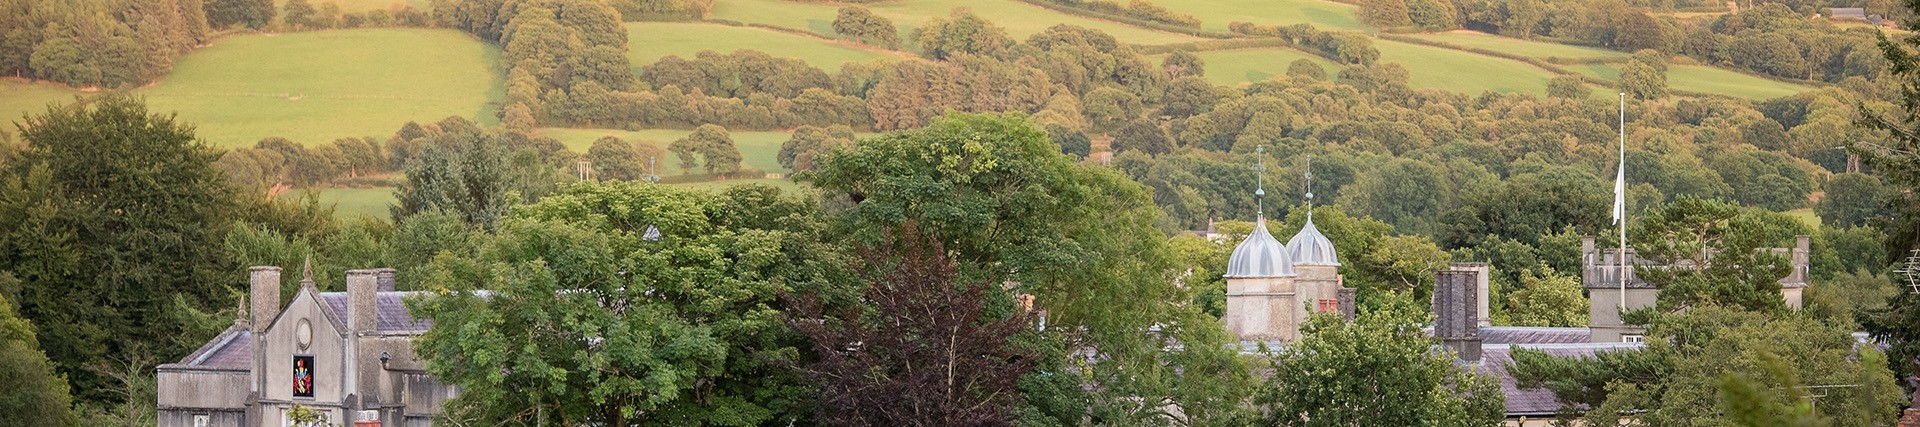 Roof of the college in Lampeter with green fields and trees.